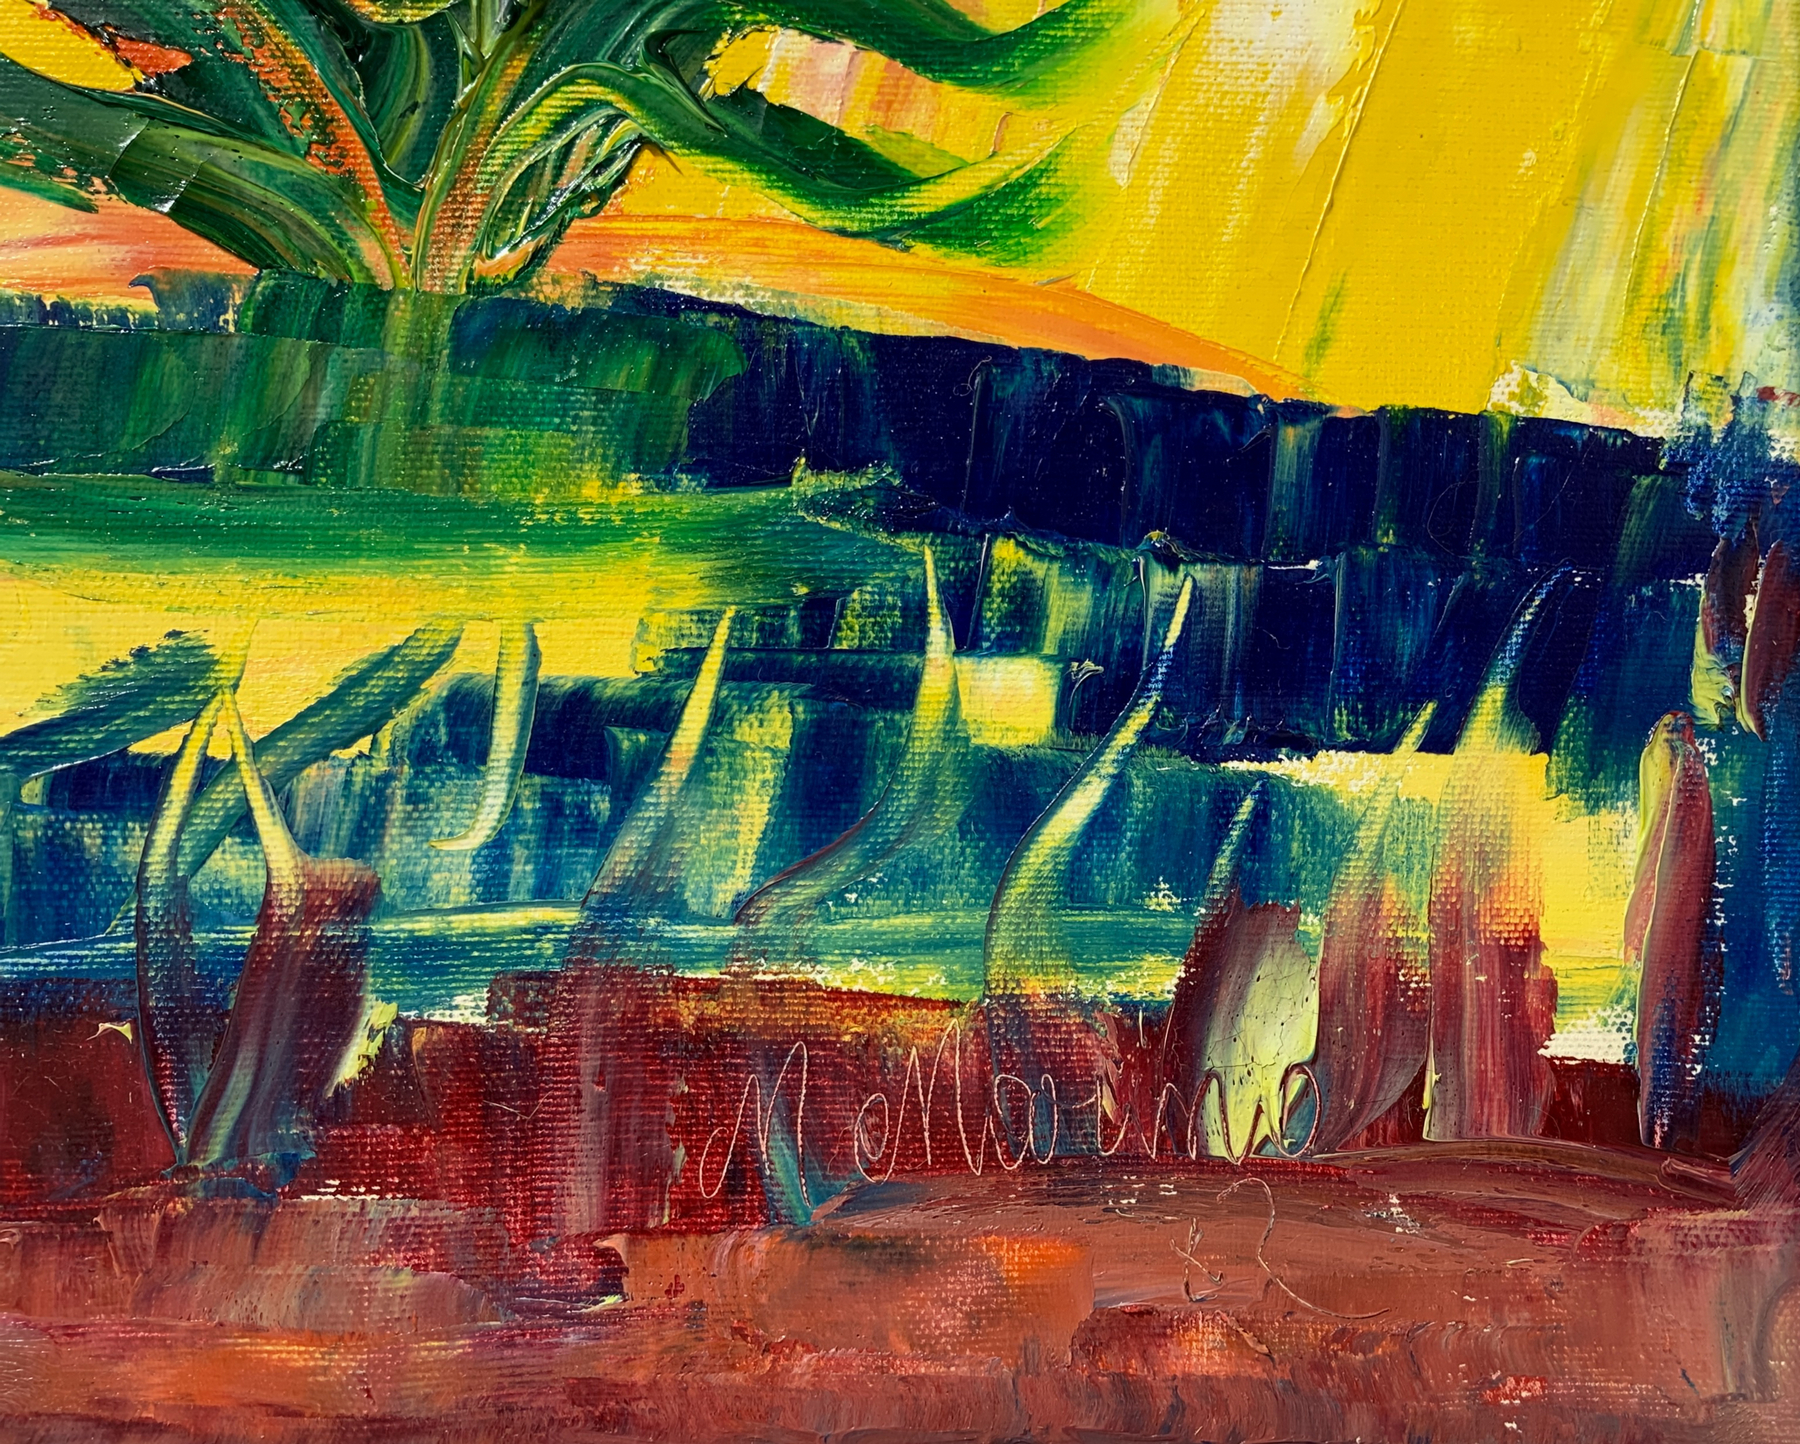 Oil painting on canvas signed M. Marino, depicting agave and wheat field. Cm 60x50 - Image 4 of 5